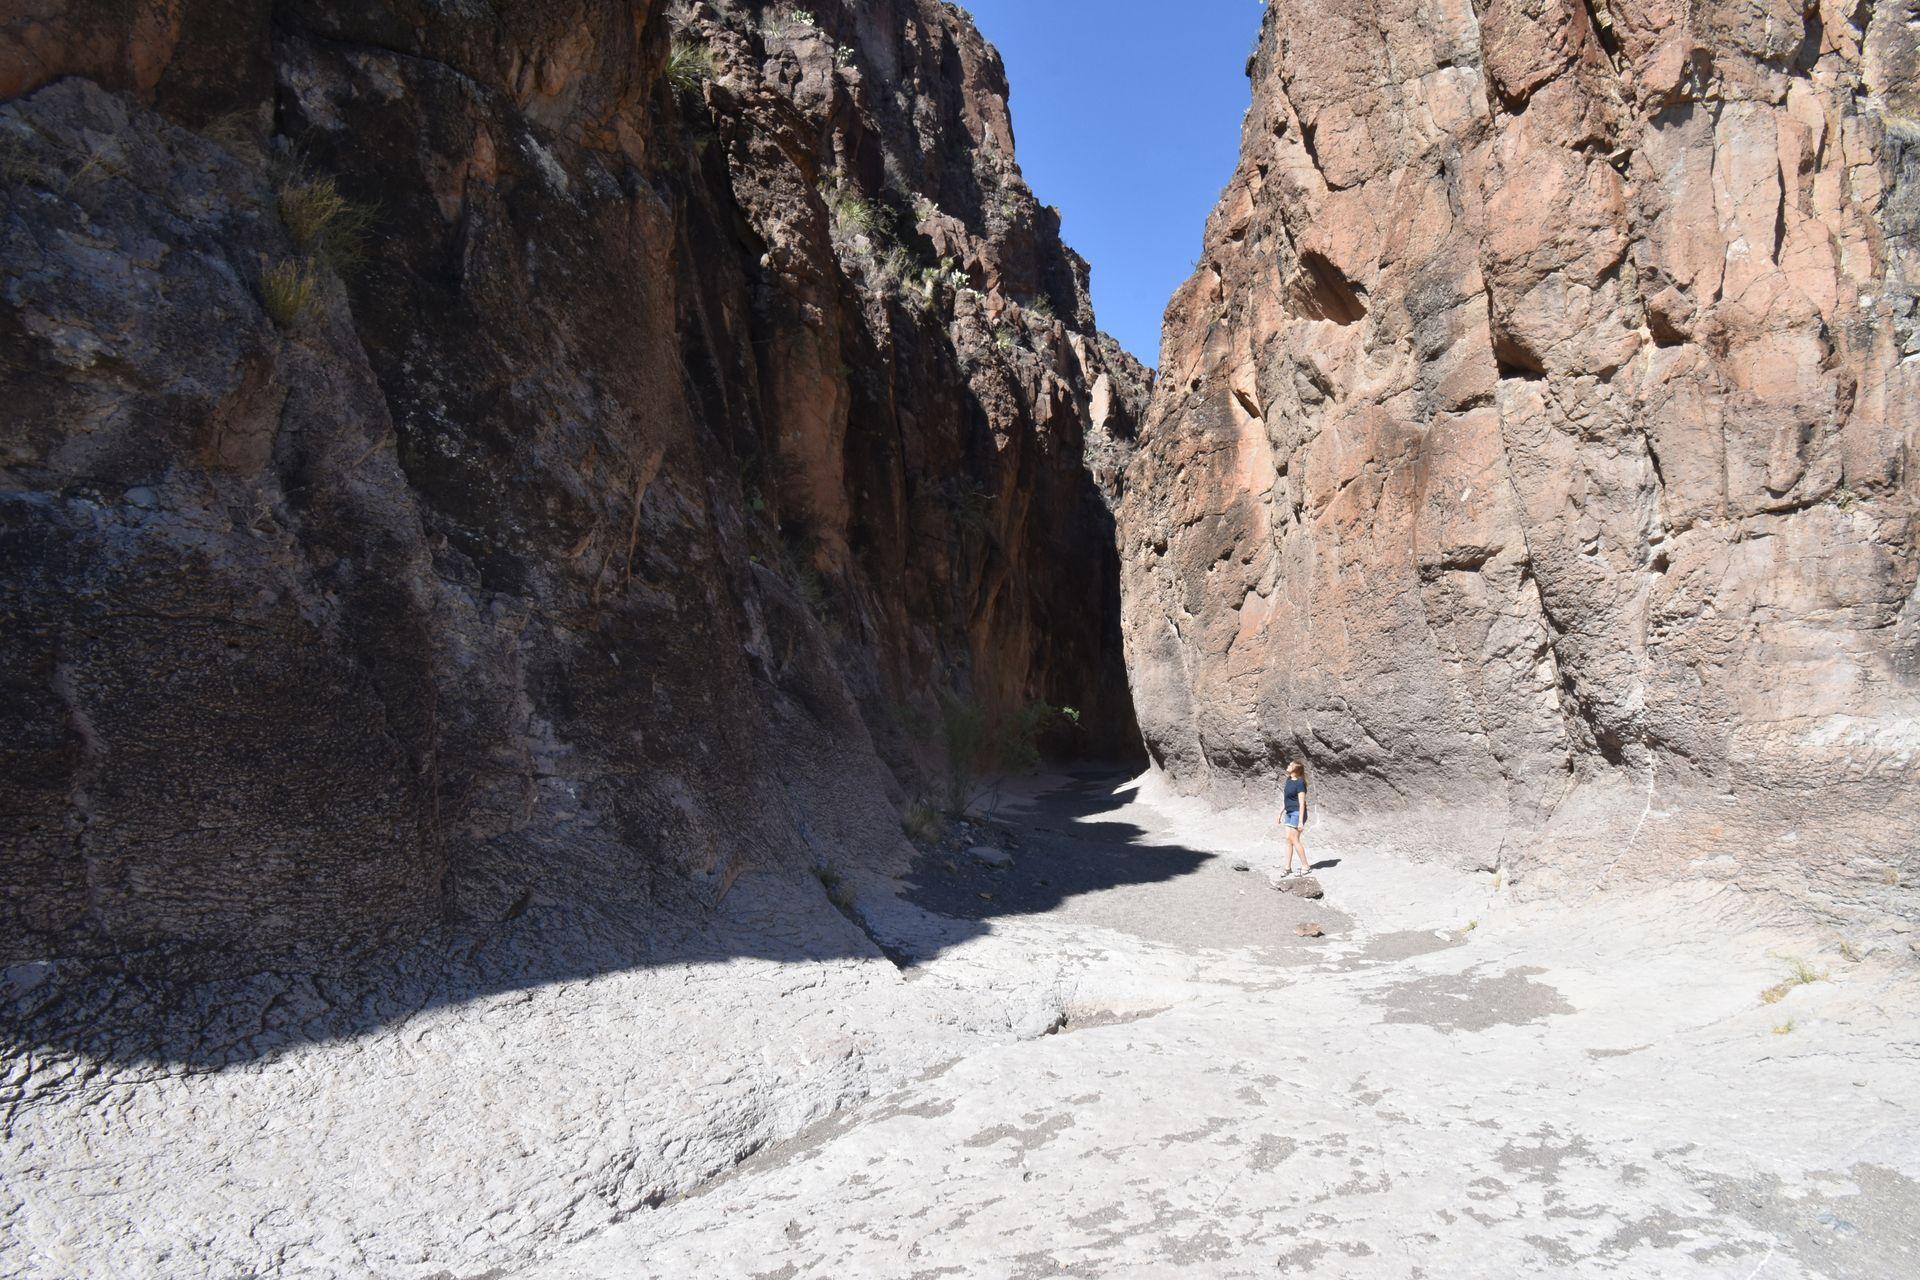 Lydia standing next to tall canyon walls on the Closed Canyon trail in Big Bend Ranch State Park.